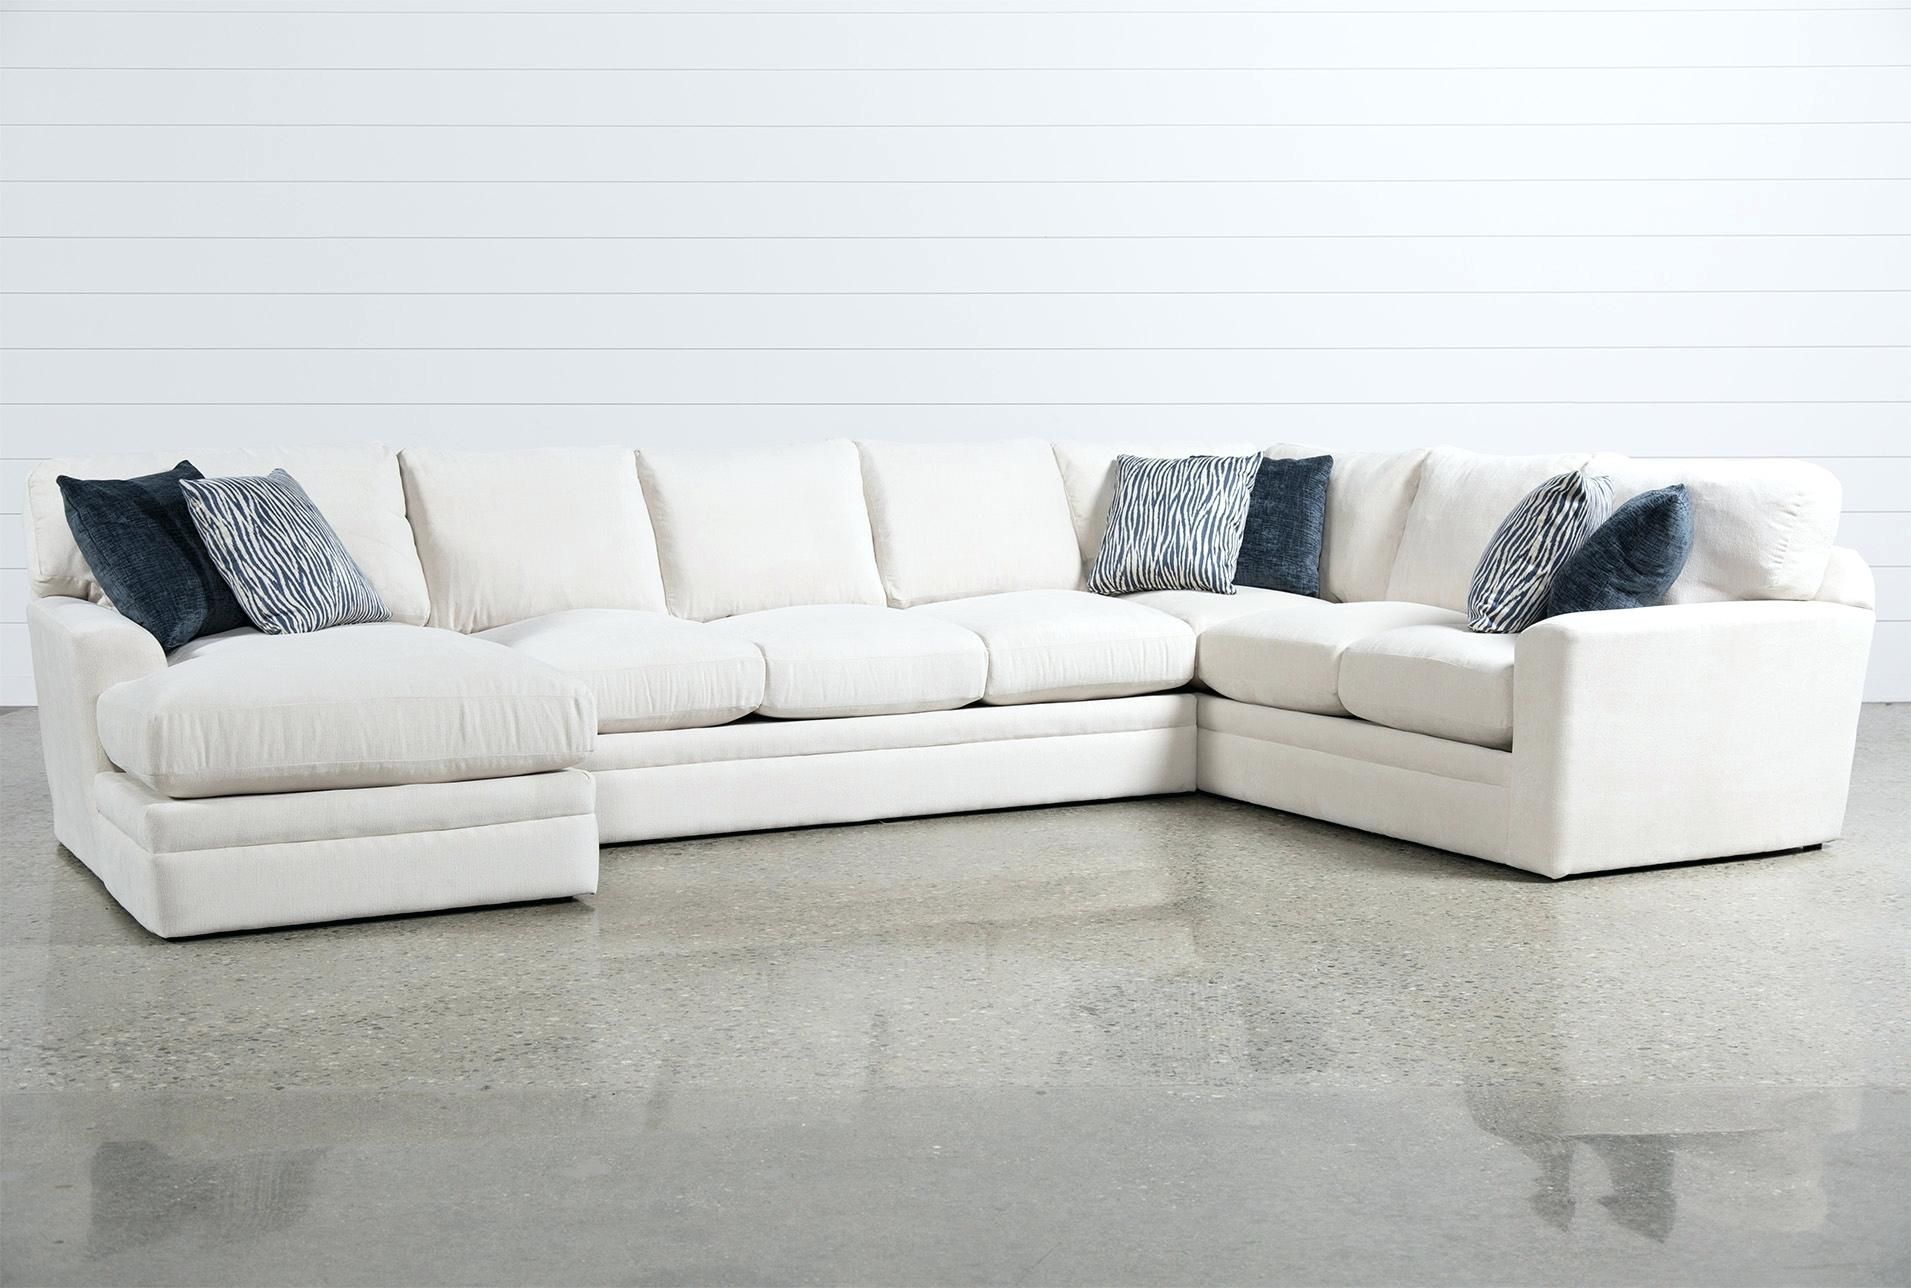 Sectionals Sofas Sectional Canada Sale Forowner Furniture Cheap Regarding Canada Sale Sectional Sofas (View 2 of 15)